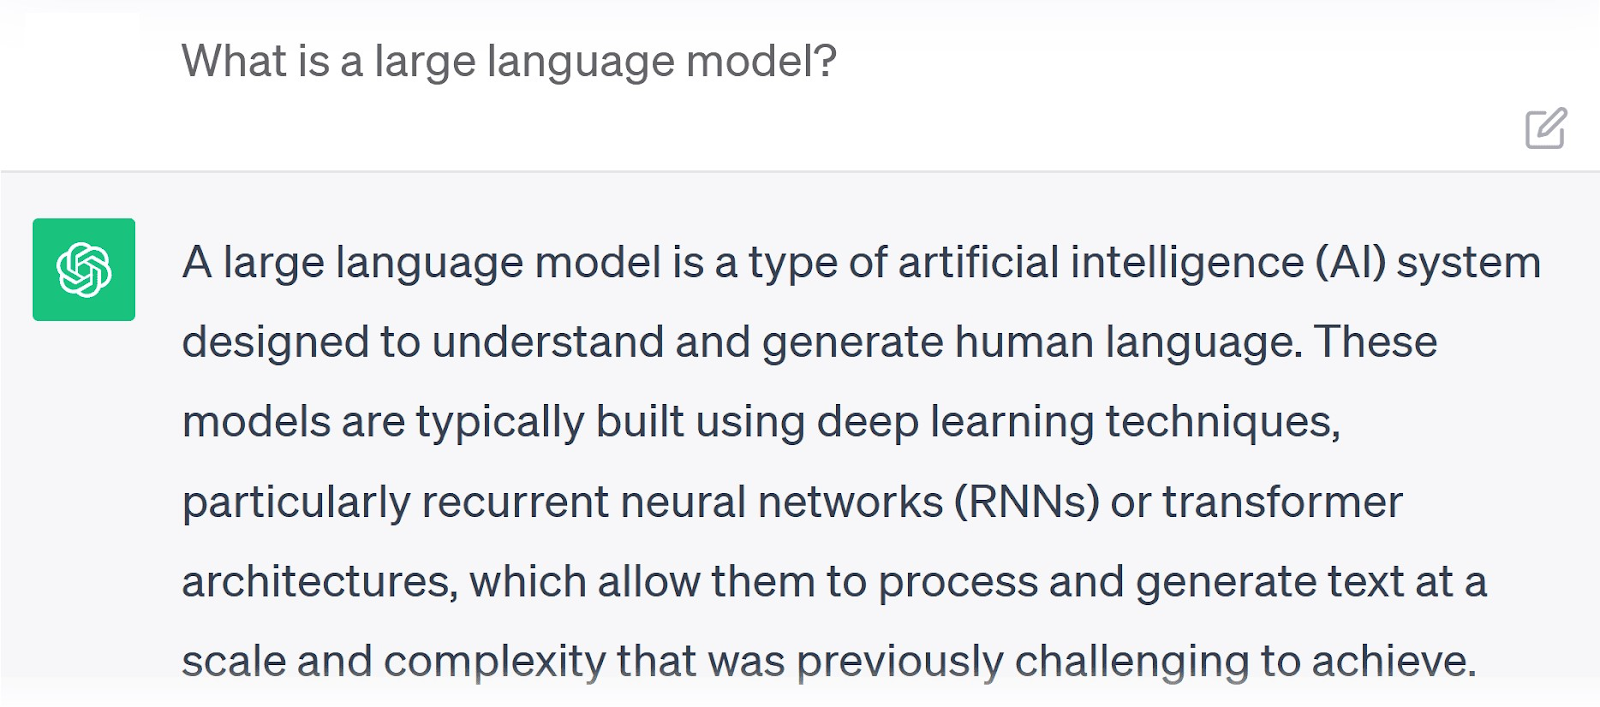 ChatGPT’s response to "What is a large language model?" prompt